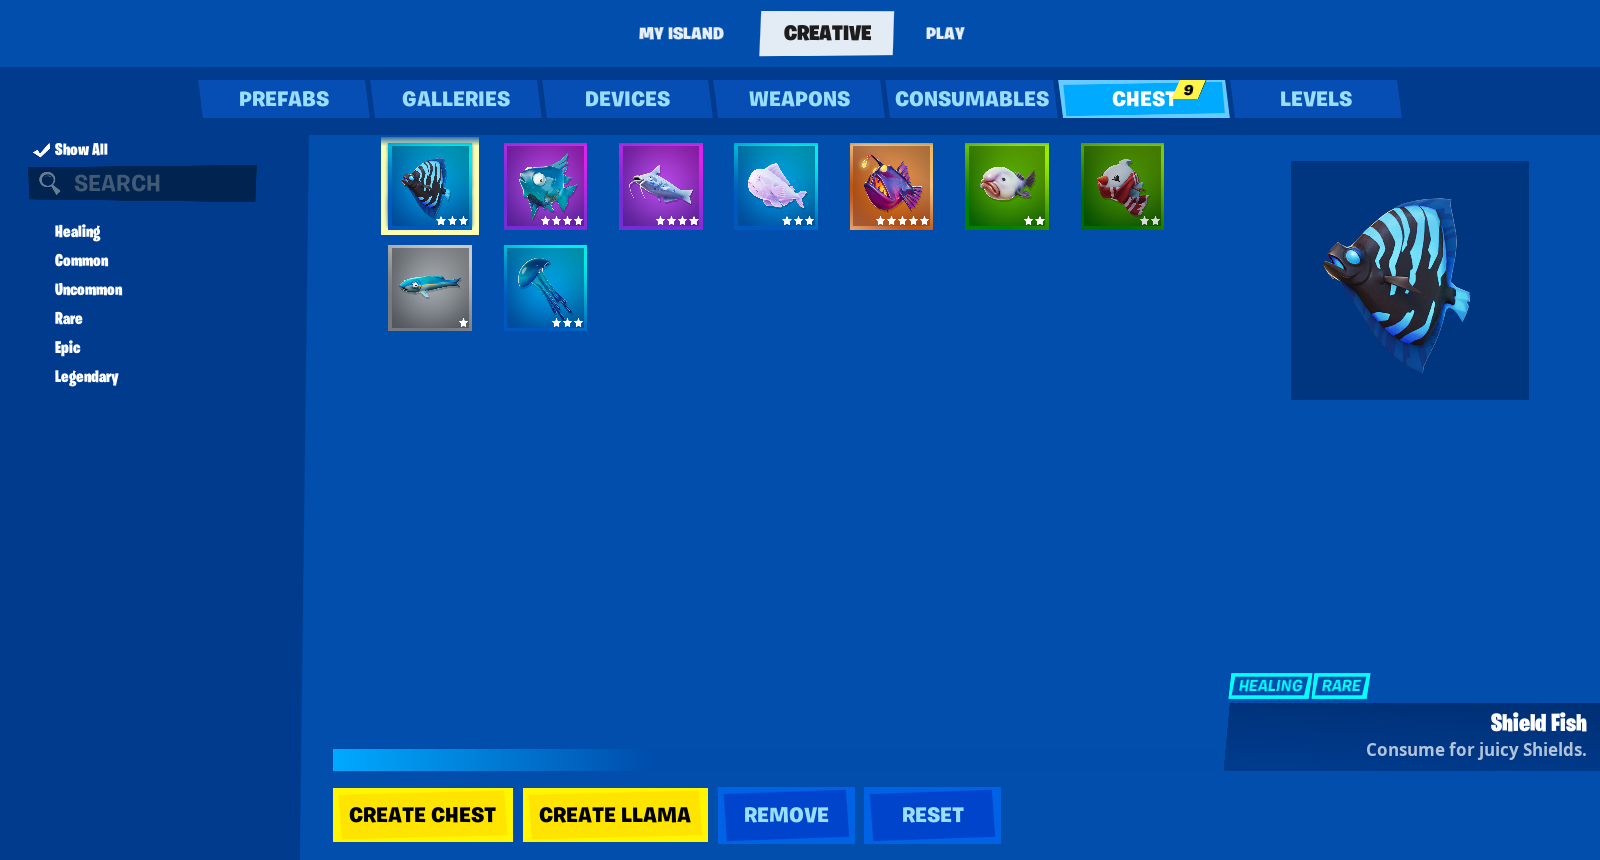 Fortnite Creative: How to use Fish consumables in the game